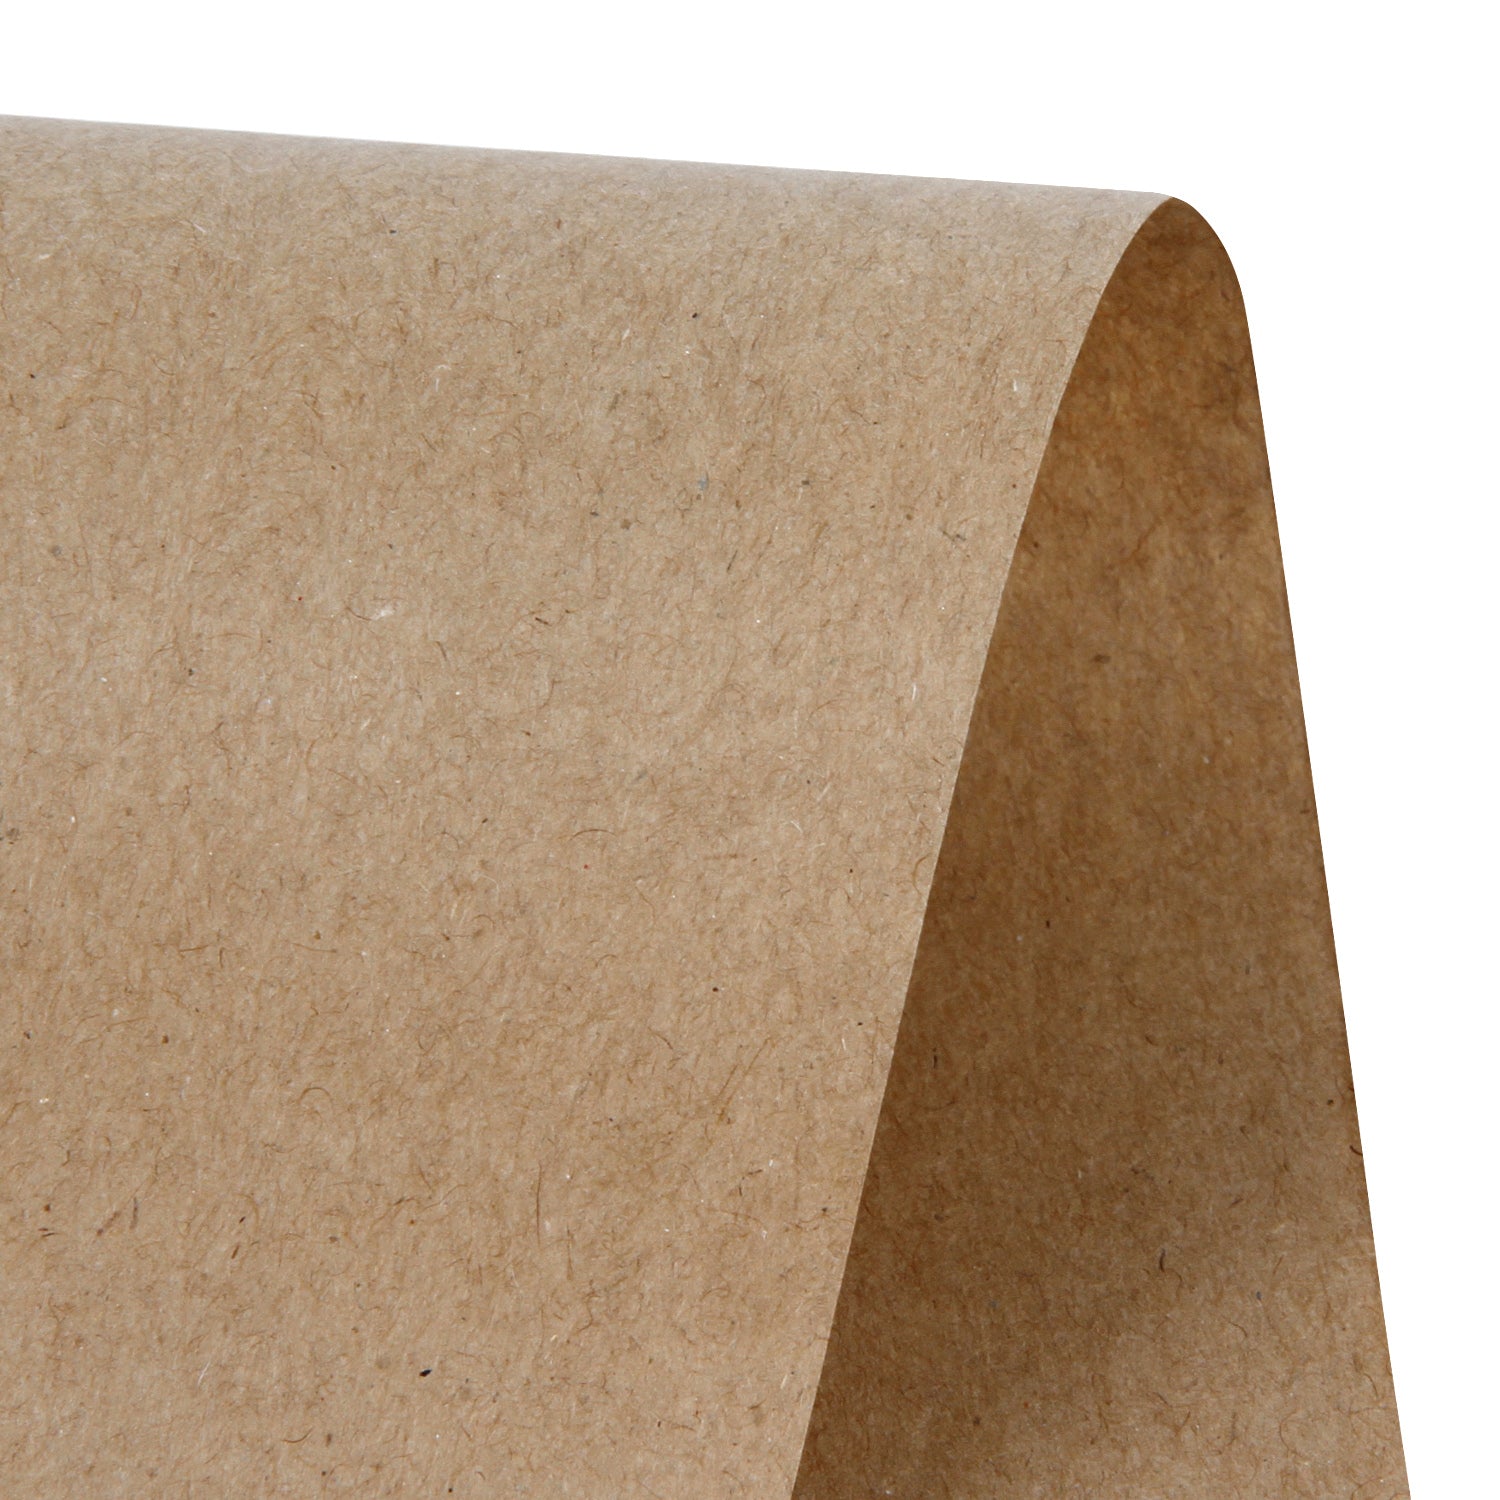 Brown Kraft Paper Roll - 24 Inch x 165 Feet - Recycled Paper